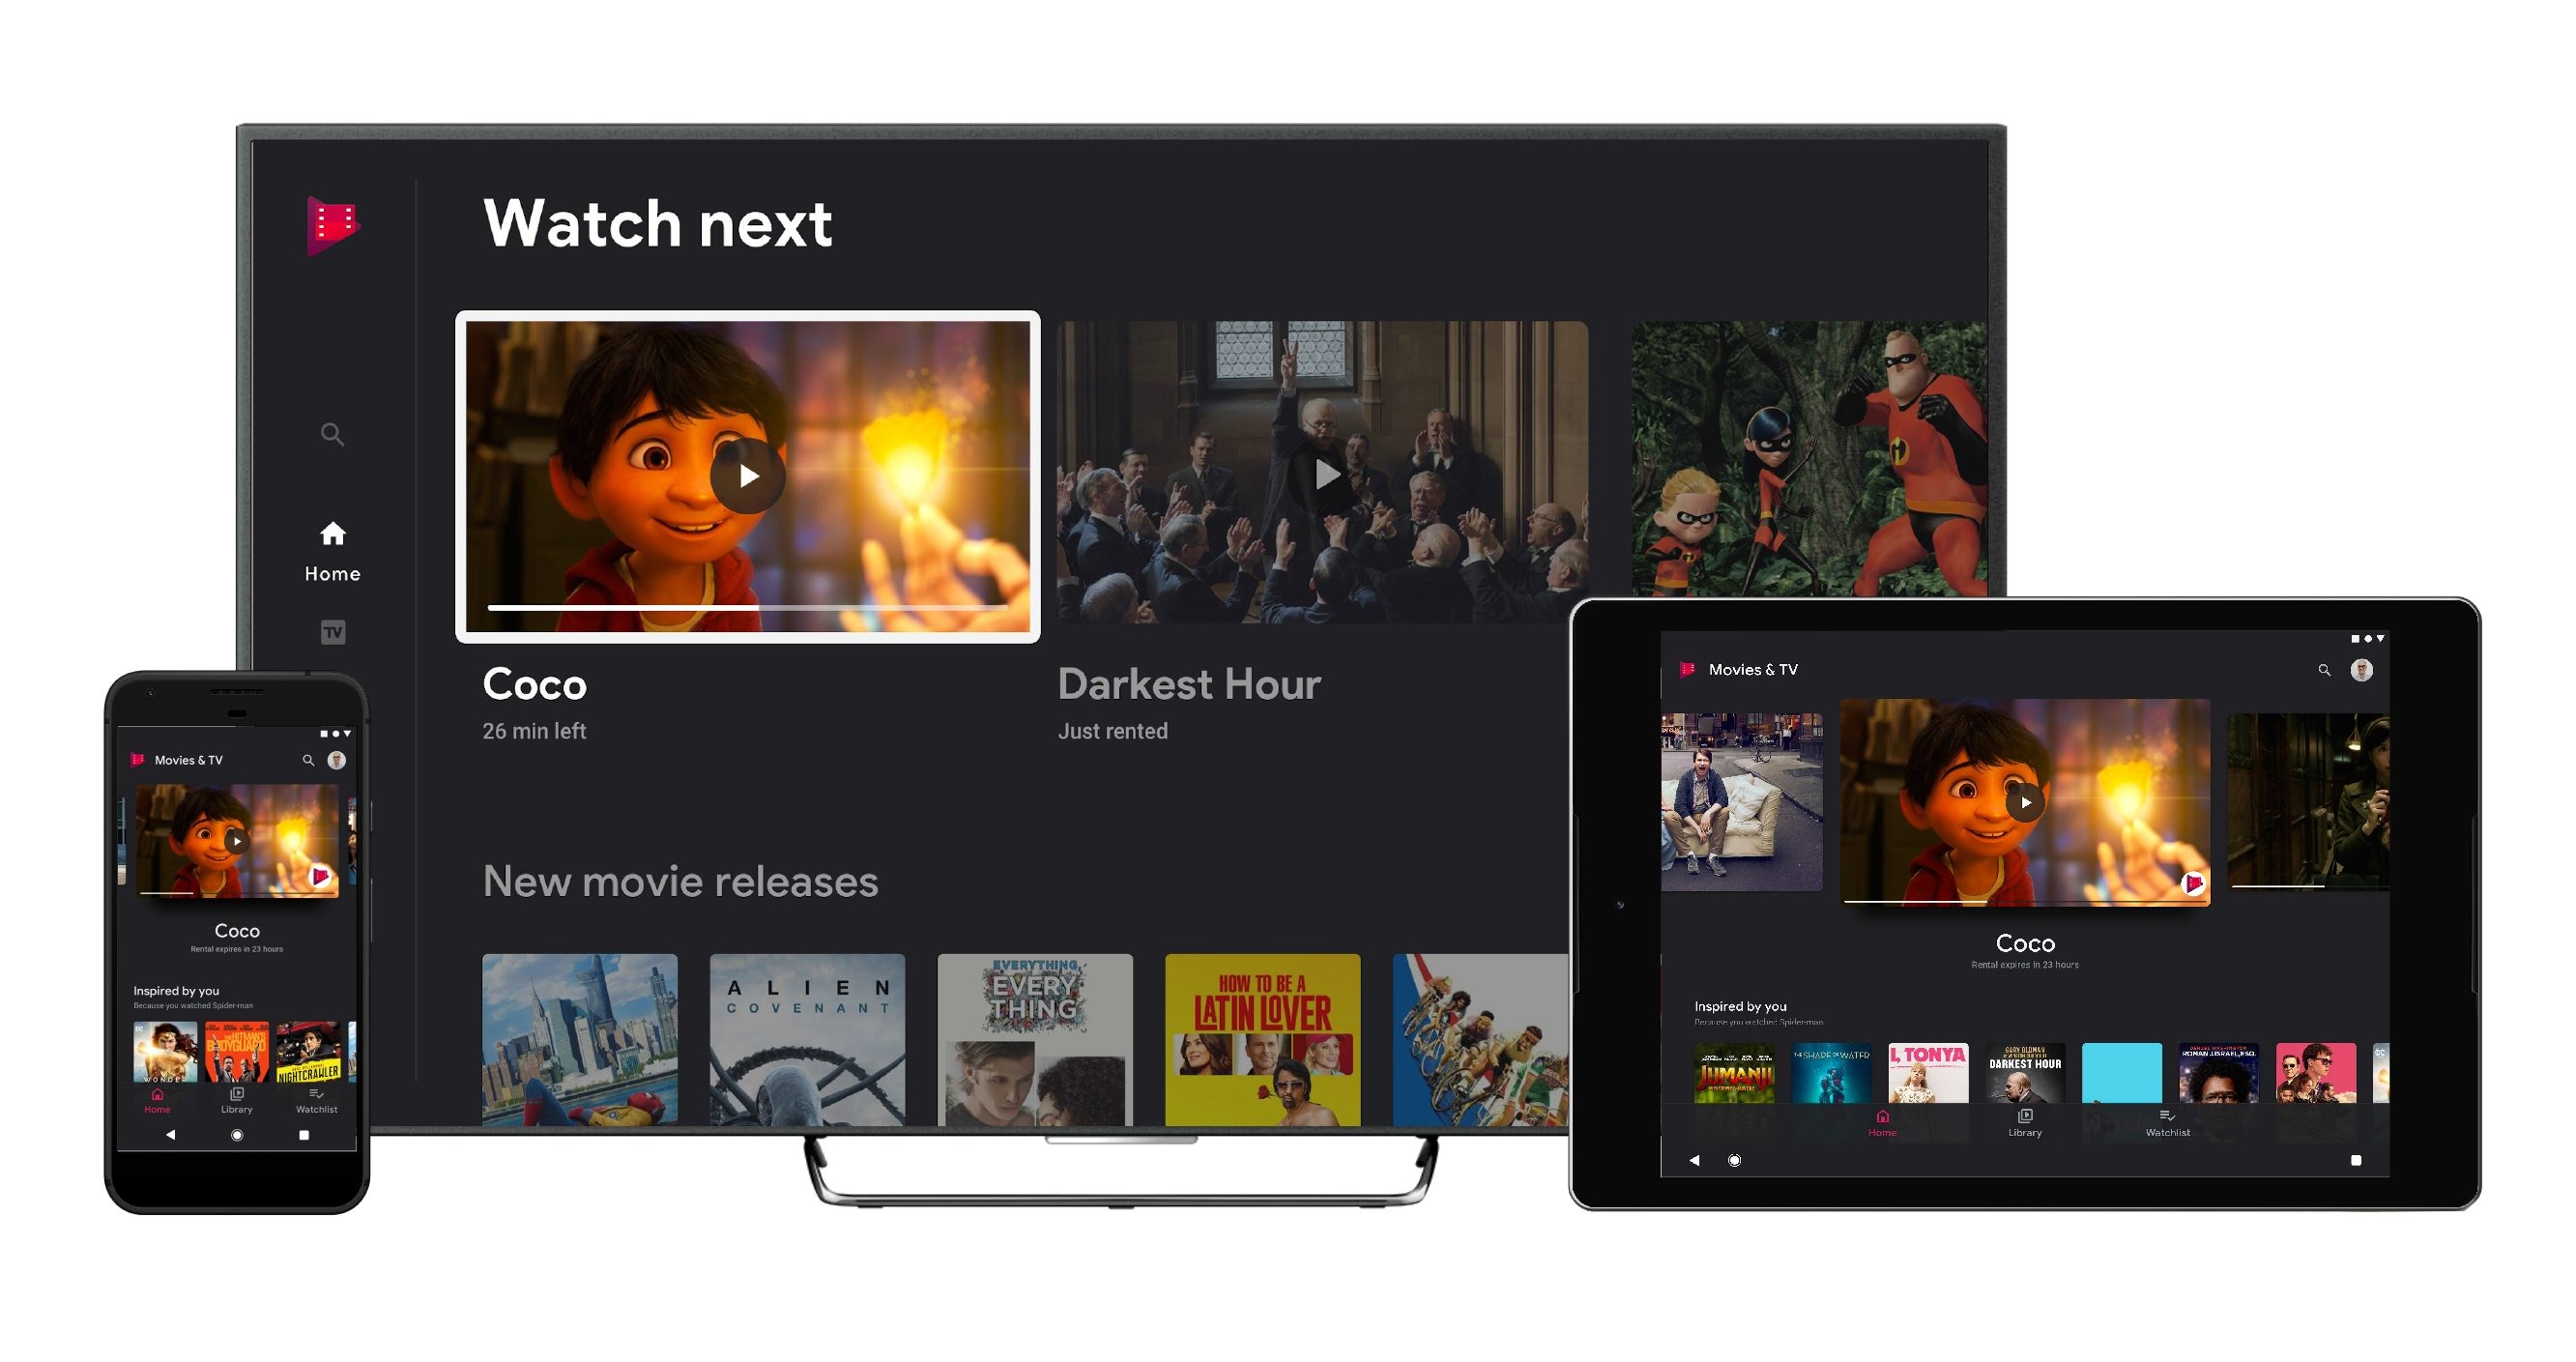 Google app for Android TV - Apps on Google Play